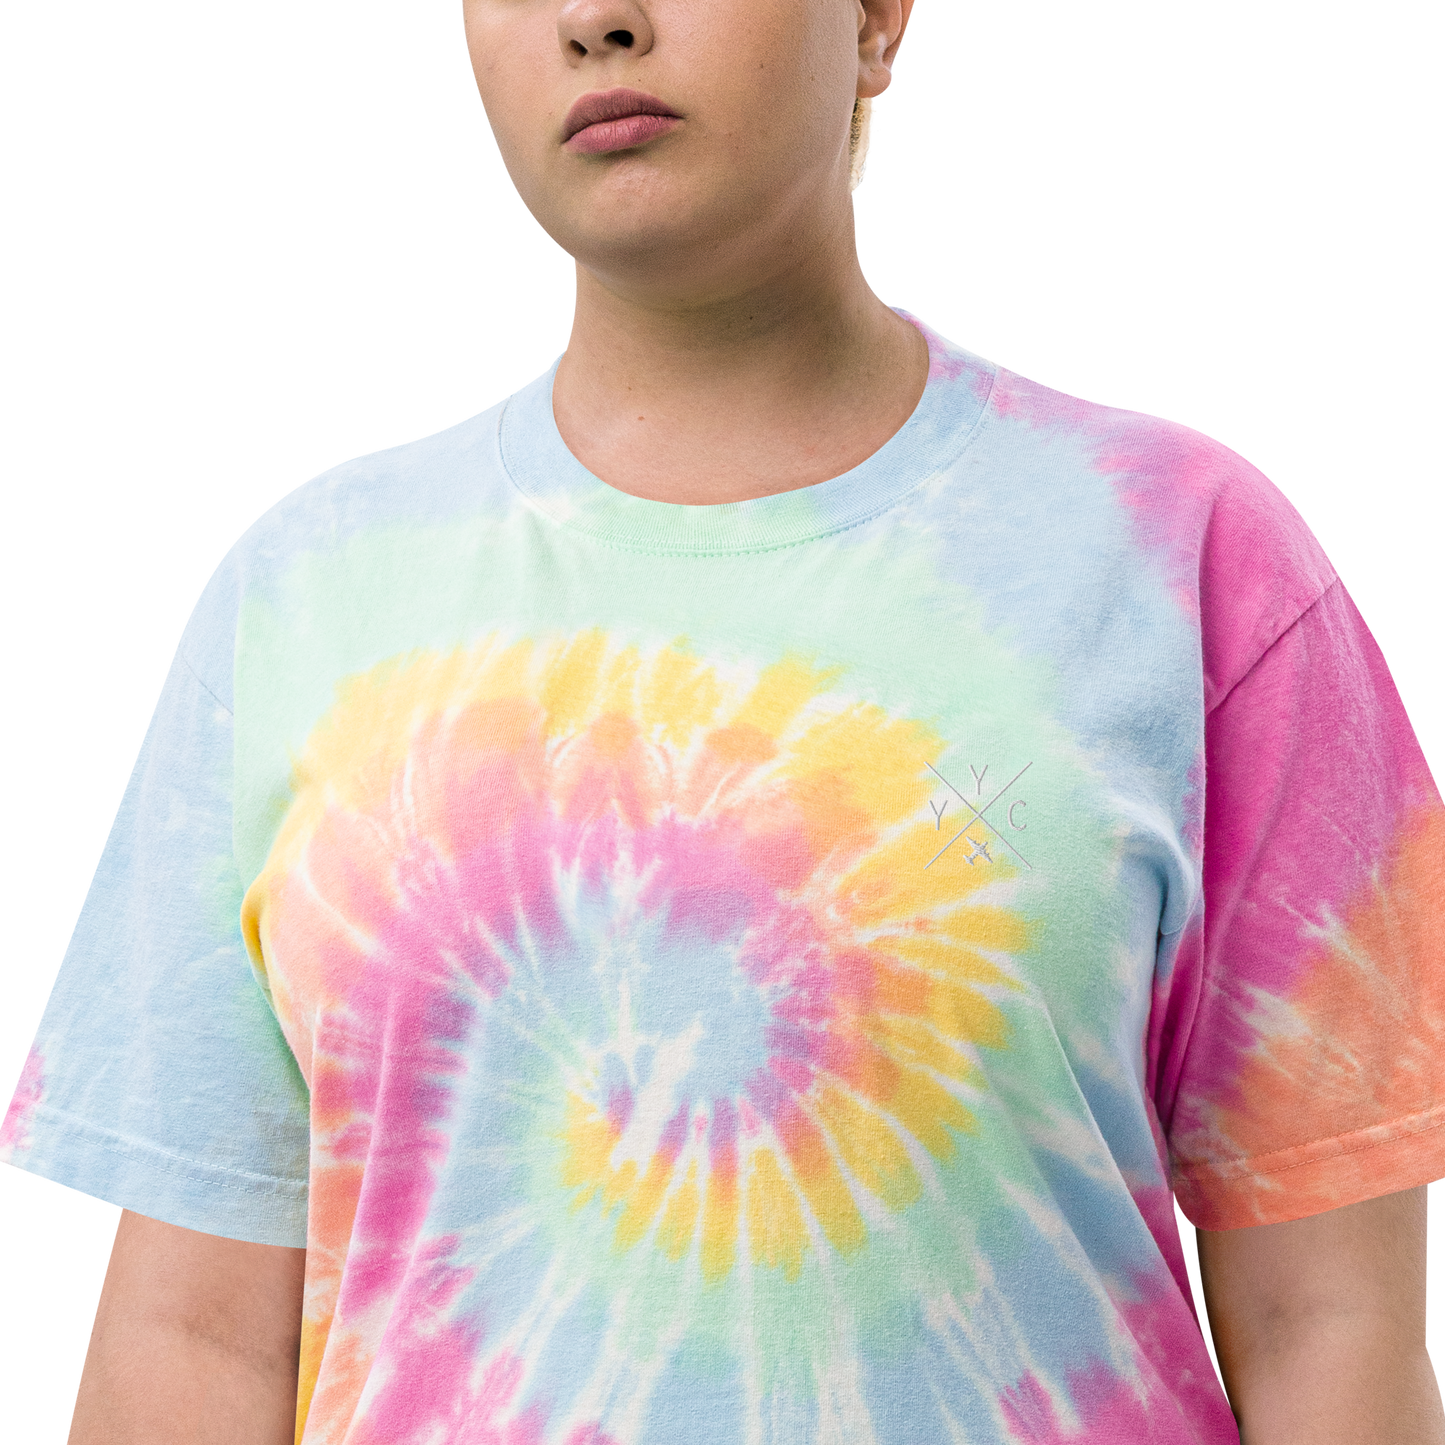 YHM Designs - YYC Calgary Oversized Tie-Dye T-Shirt - Crossed-X Design with Airport Code and Vintage Propliner - White Embroidery - Image 13